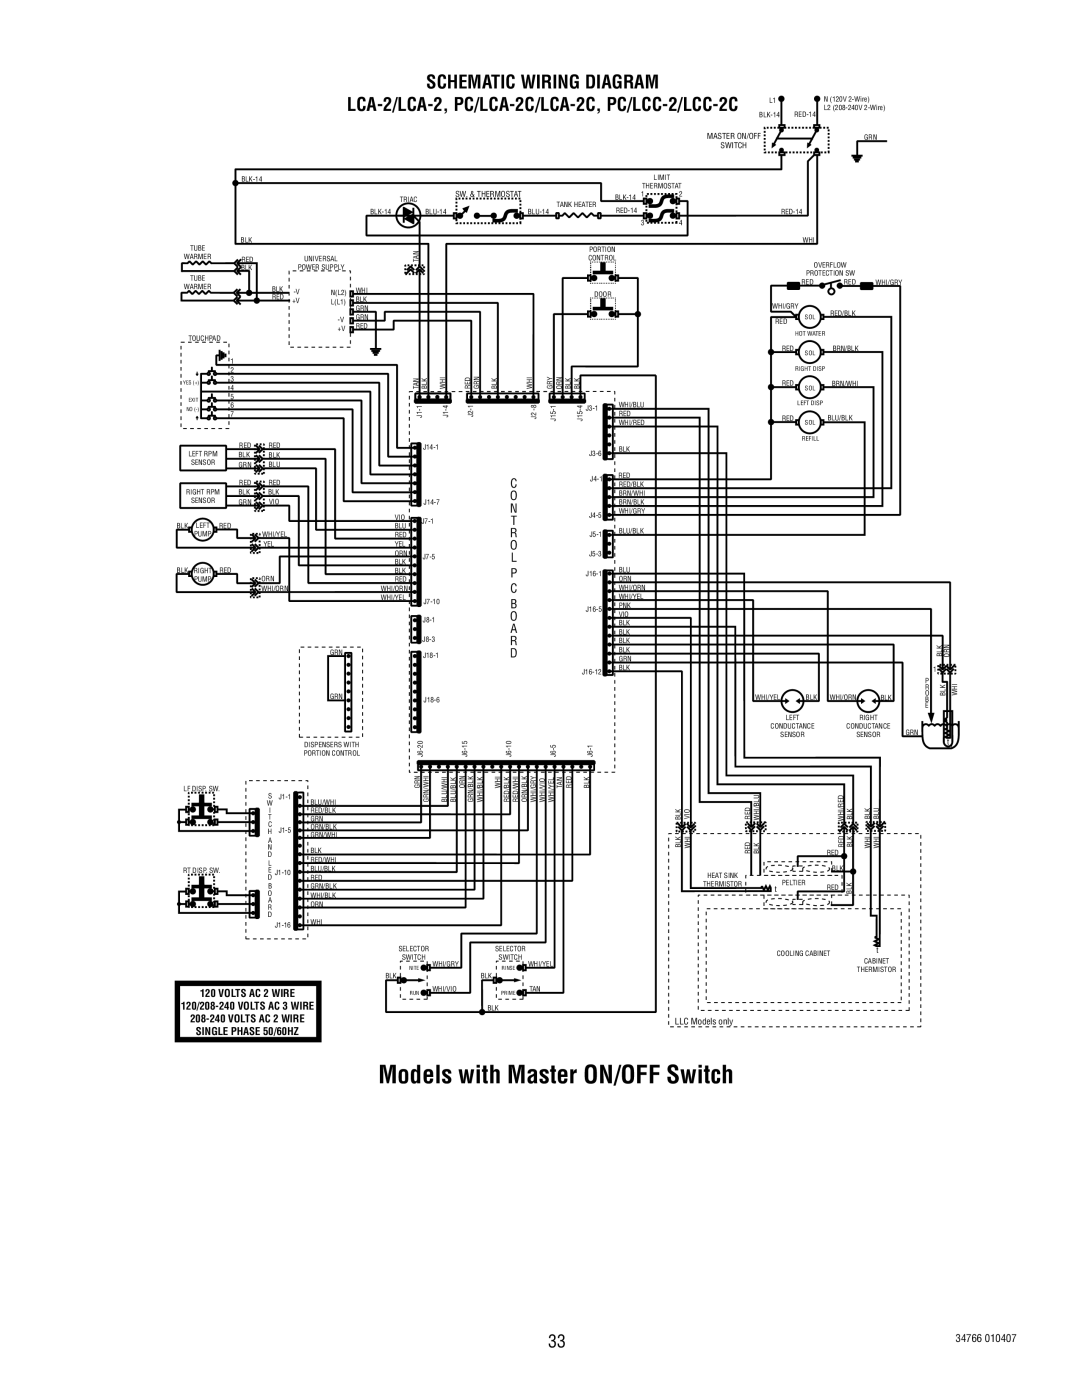 Bunn manual Models with Master ON/OFF Switch, Schematic Wiring Diagram, LCA-2/LCA-2, PC/LCA-2C/LCA-2C, PC/LCC-2/LCC-2C 